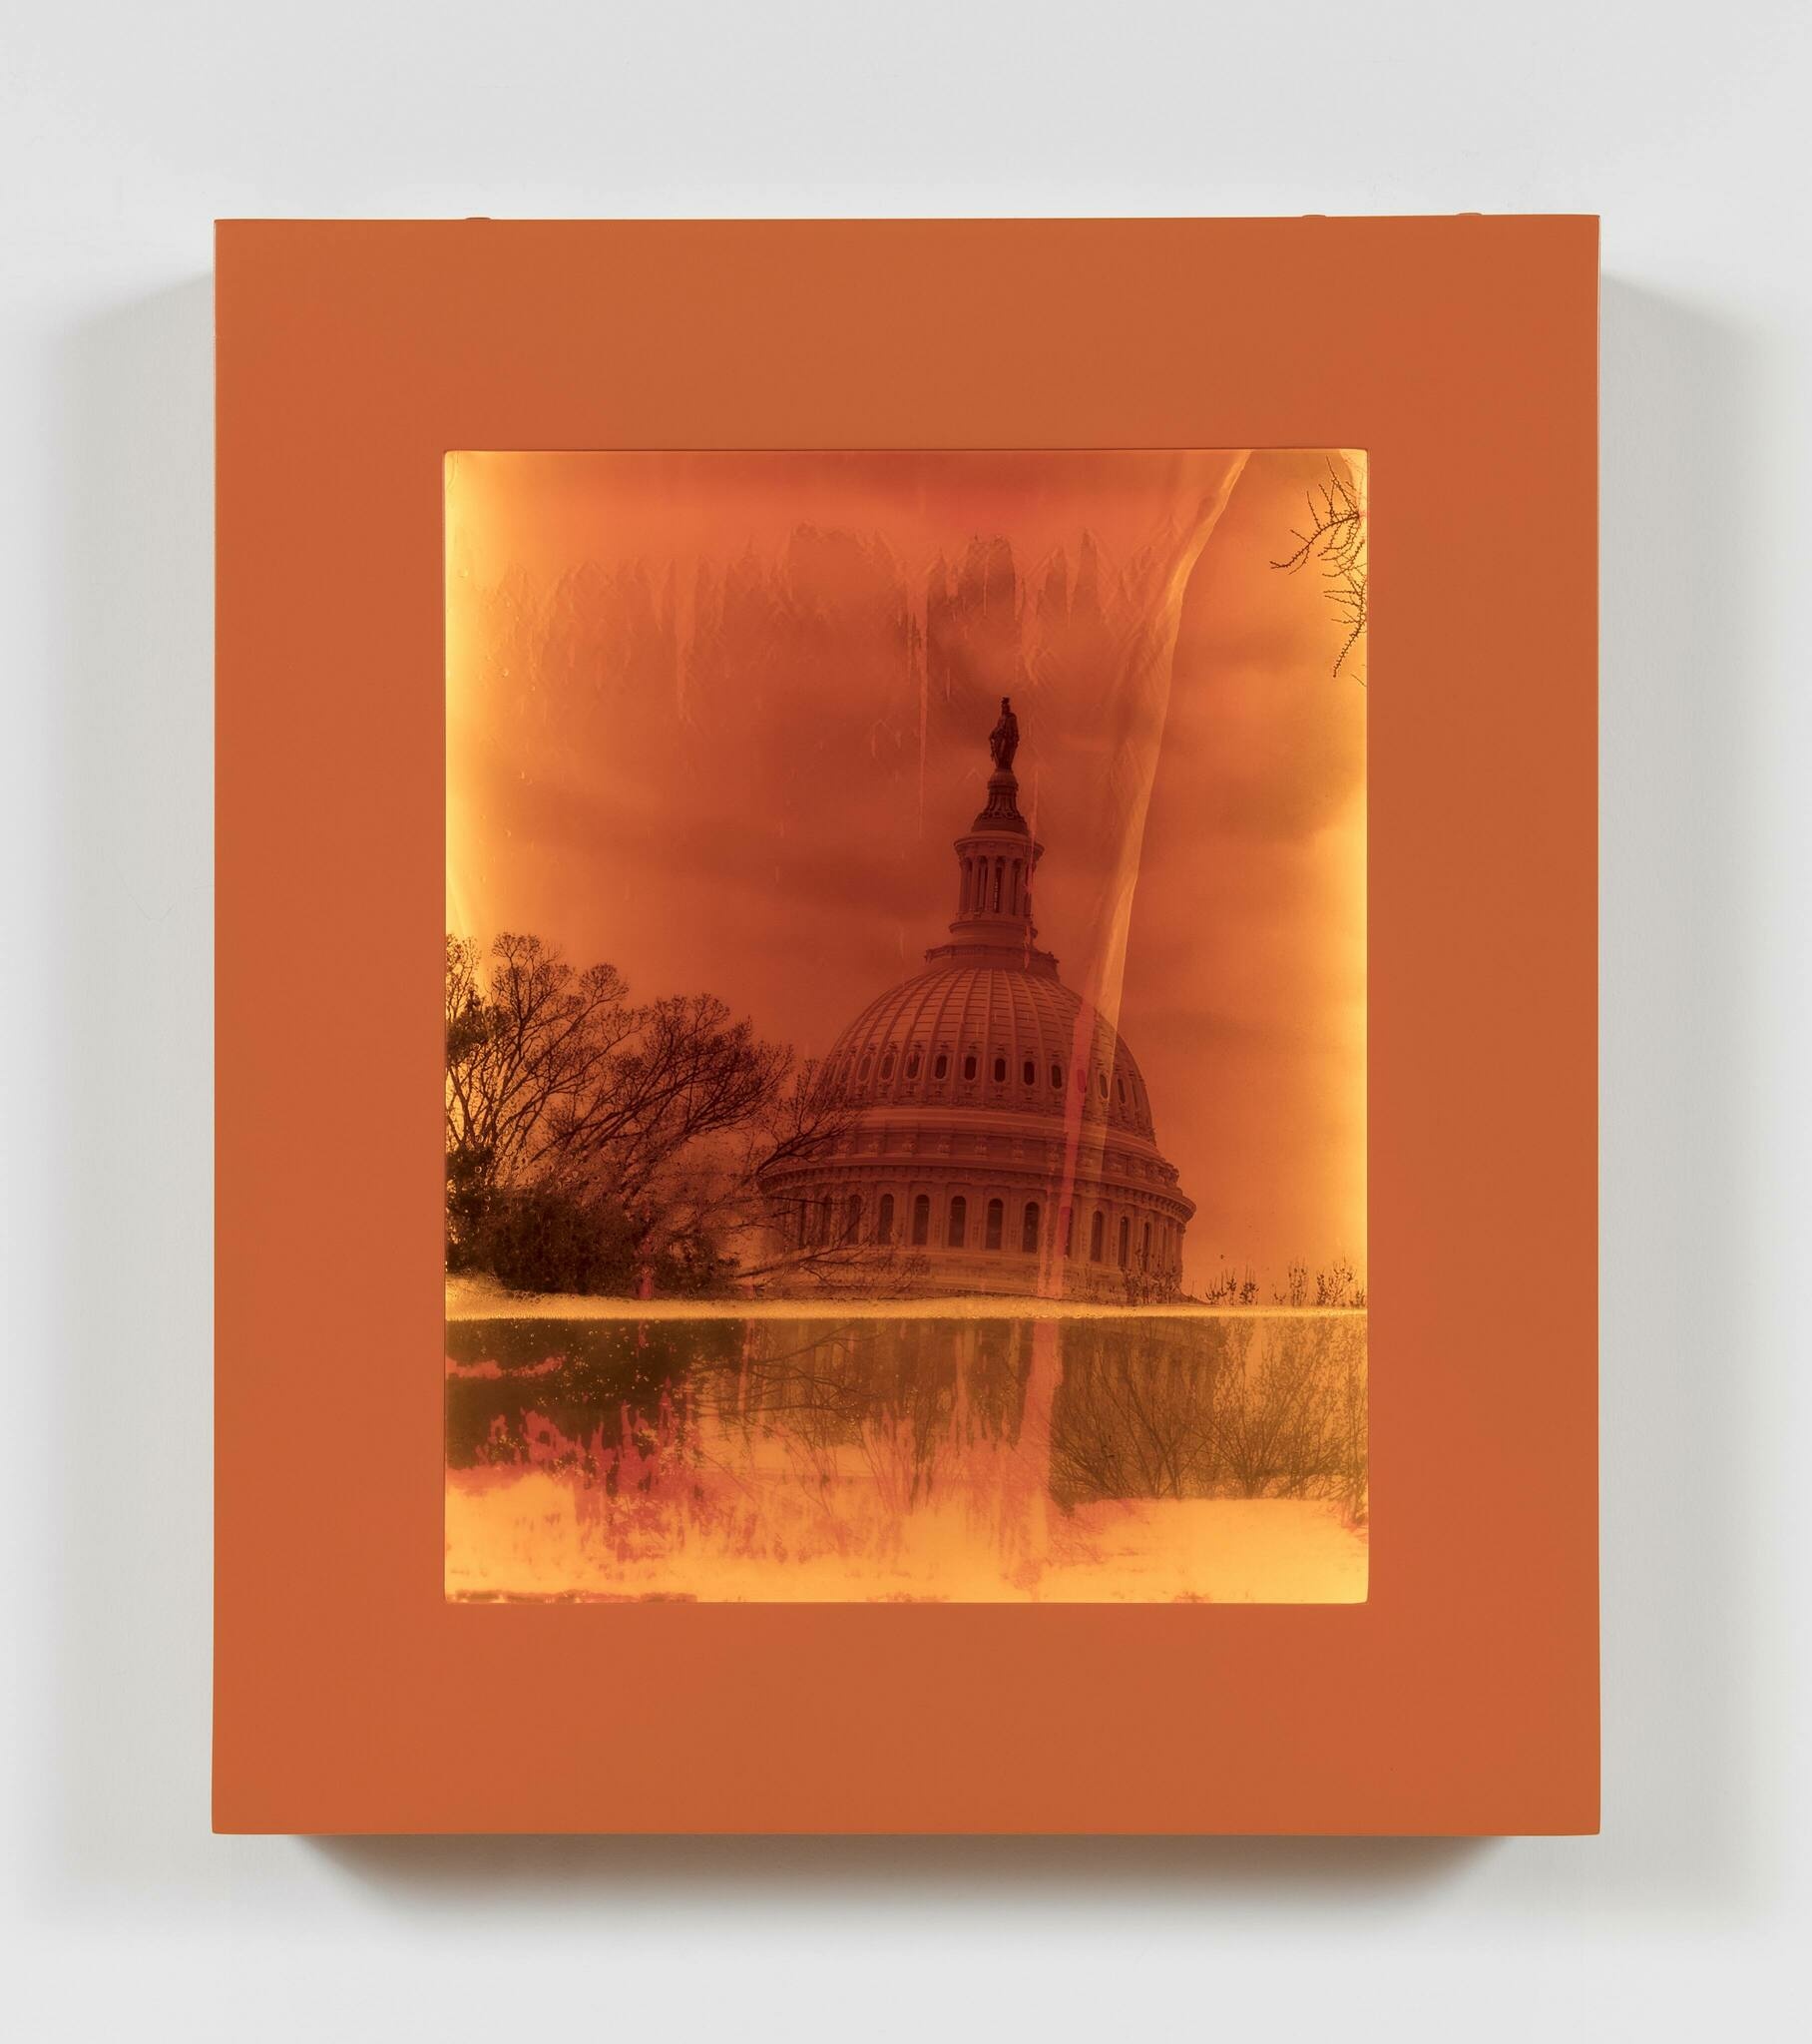 Photo of the United States Capitol building contained within an orange frame filling with water